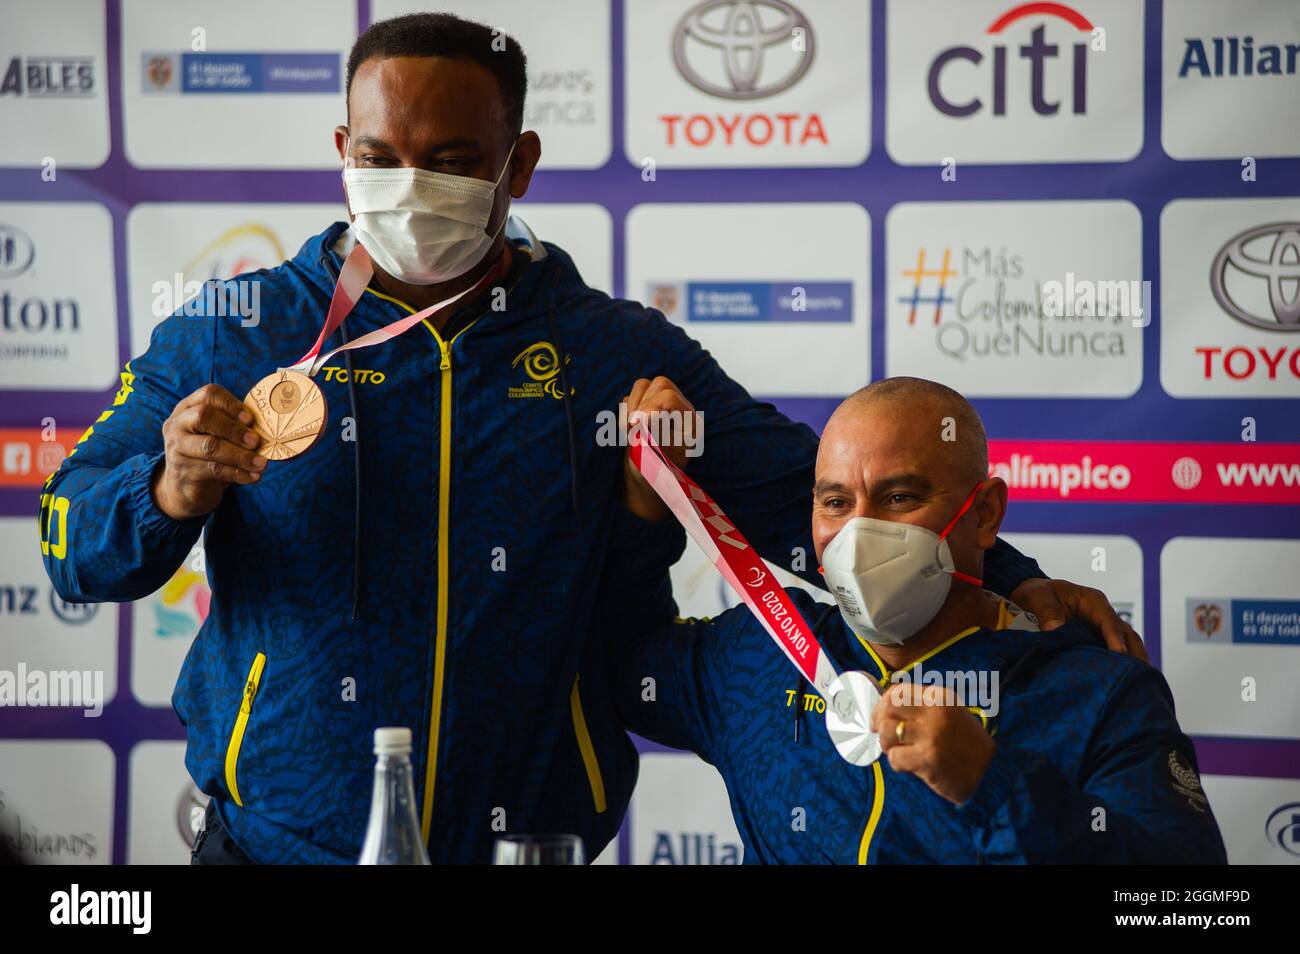 Fabian Torres (Left) and Moises Fuentes (Right) show their bronze and silver medals respectively during an event at Hilton Corferias Hotel after Paralympic Medallists Fabio Torres parapowerlifting bronze medal and Moises Fuentes 100 meter swiming silver medal arrived to Colombia after their participation in the Tokyo 2020+1 Paralympic Games. In Bogota, Colombia on September 1, 2021. Stock Photo